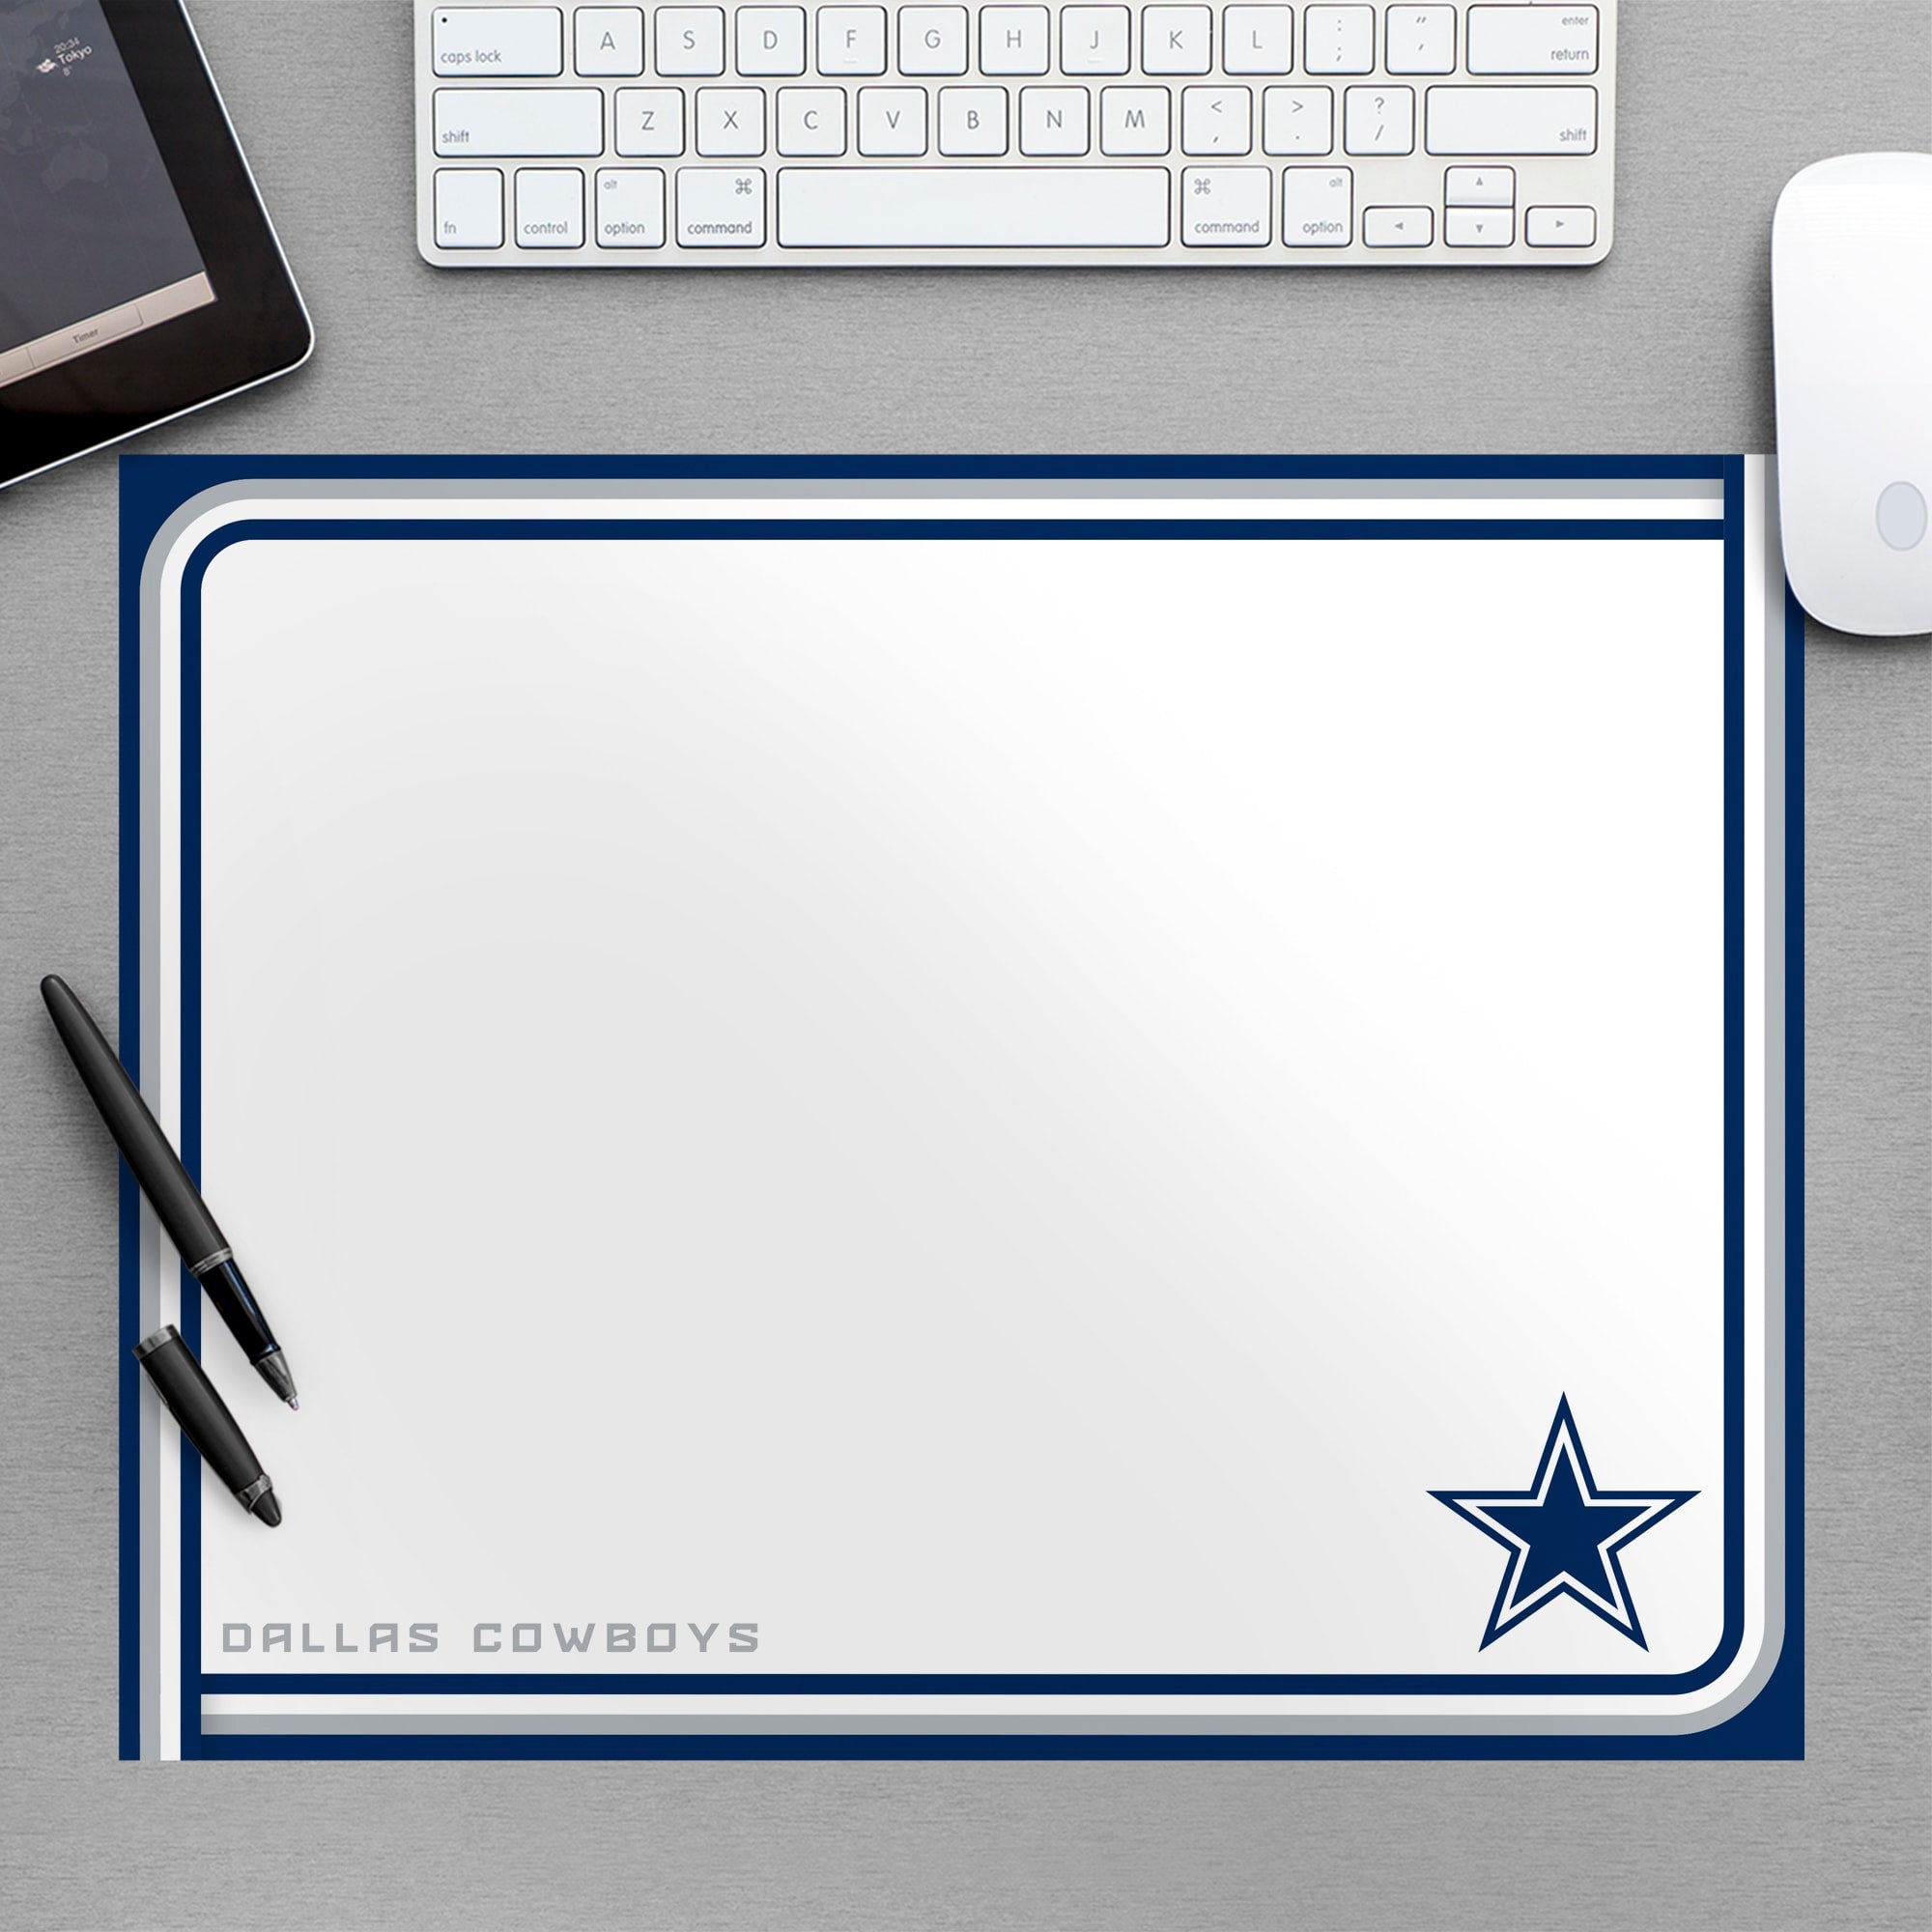 Dallas Cowboys: Dry Erase Whiteboard - Officially Licensed NFL Removable Wall Decal Large by Fathead | Vinyl